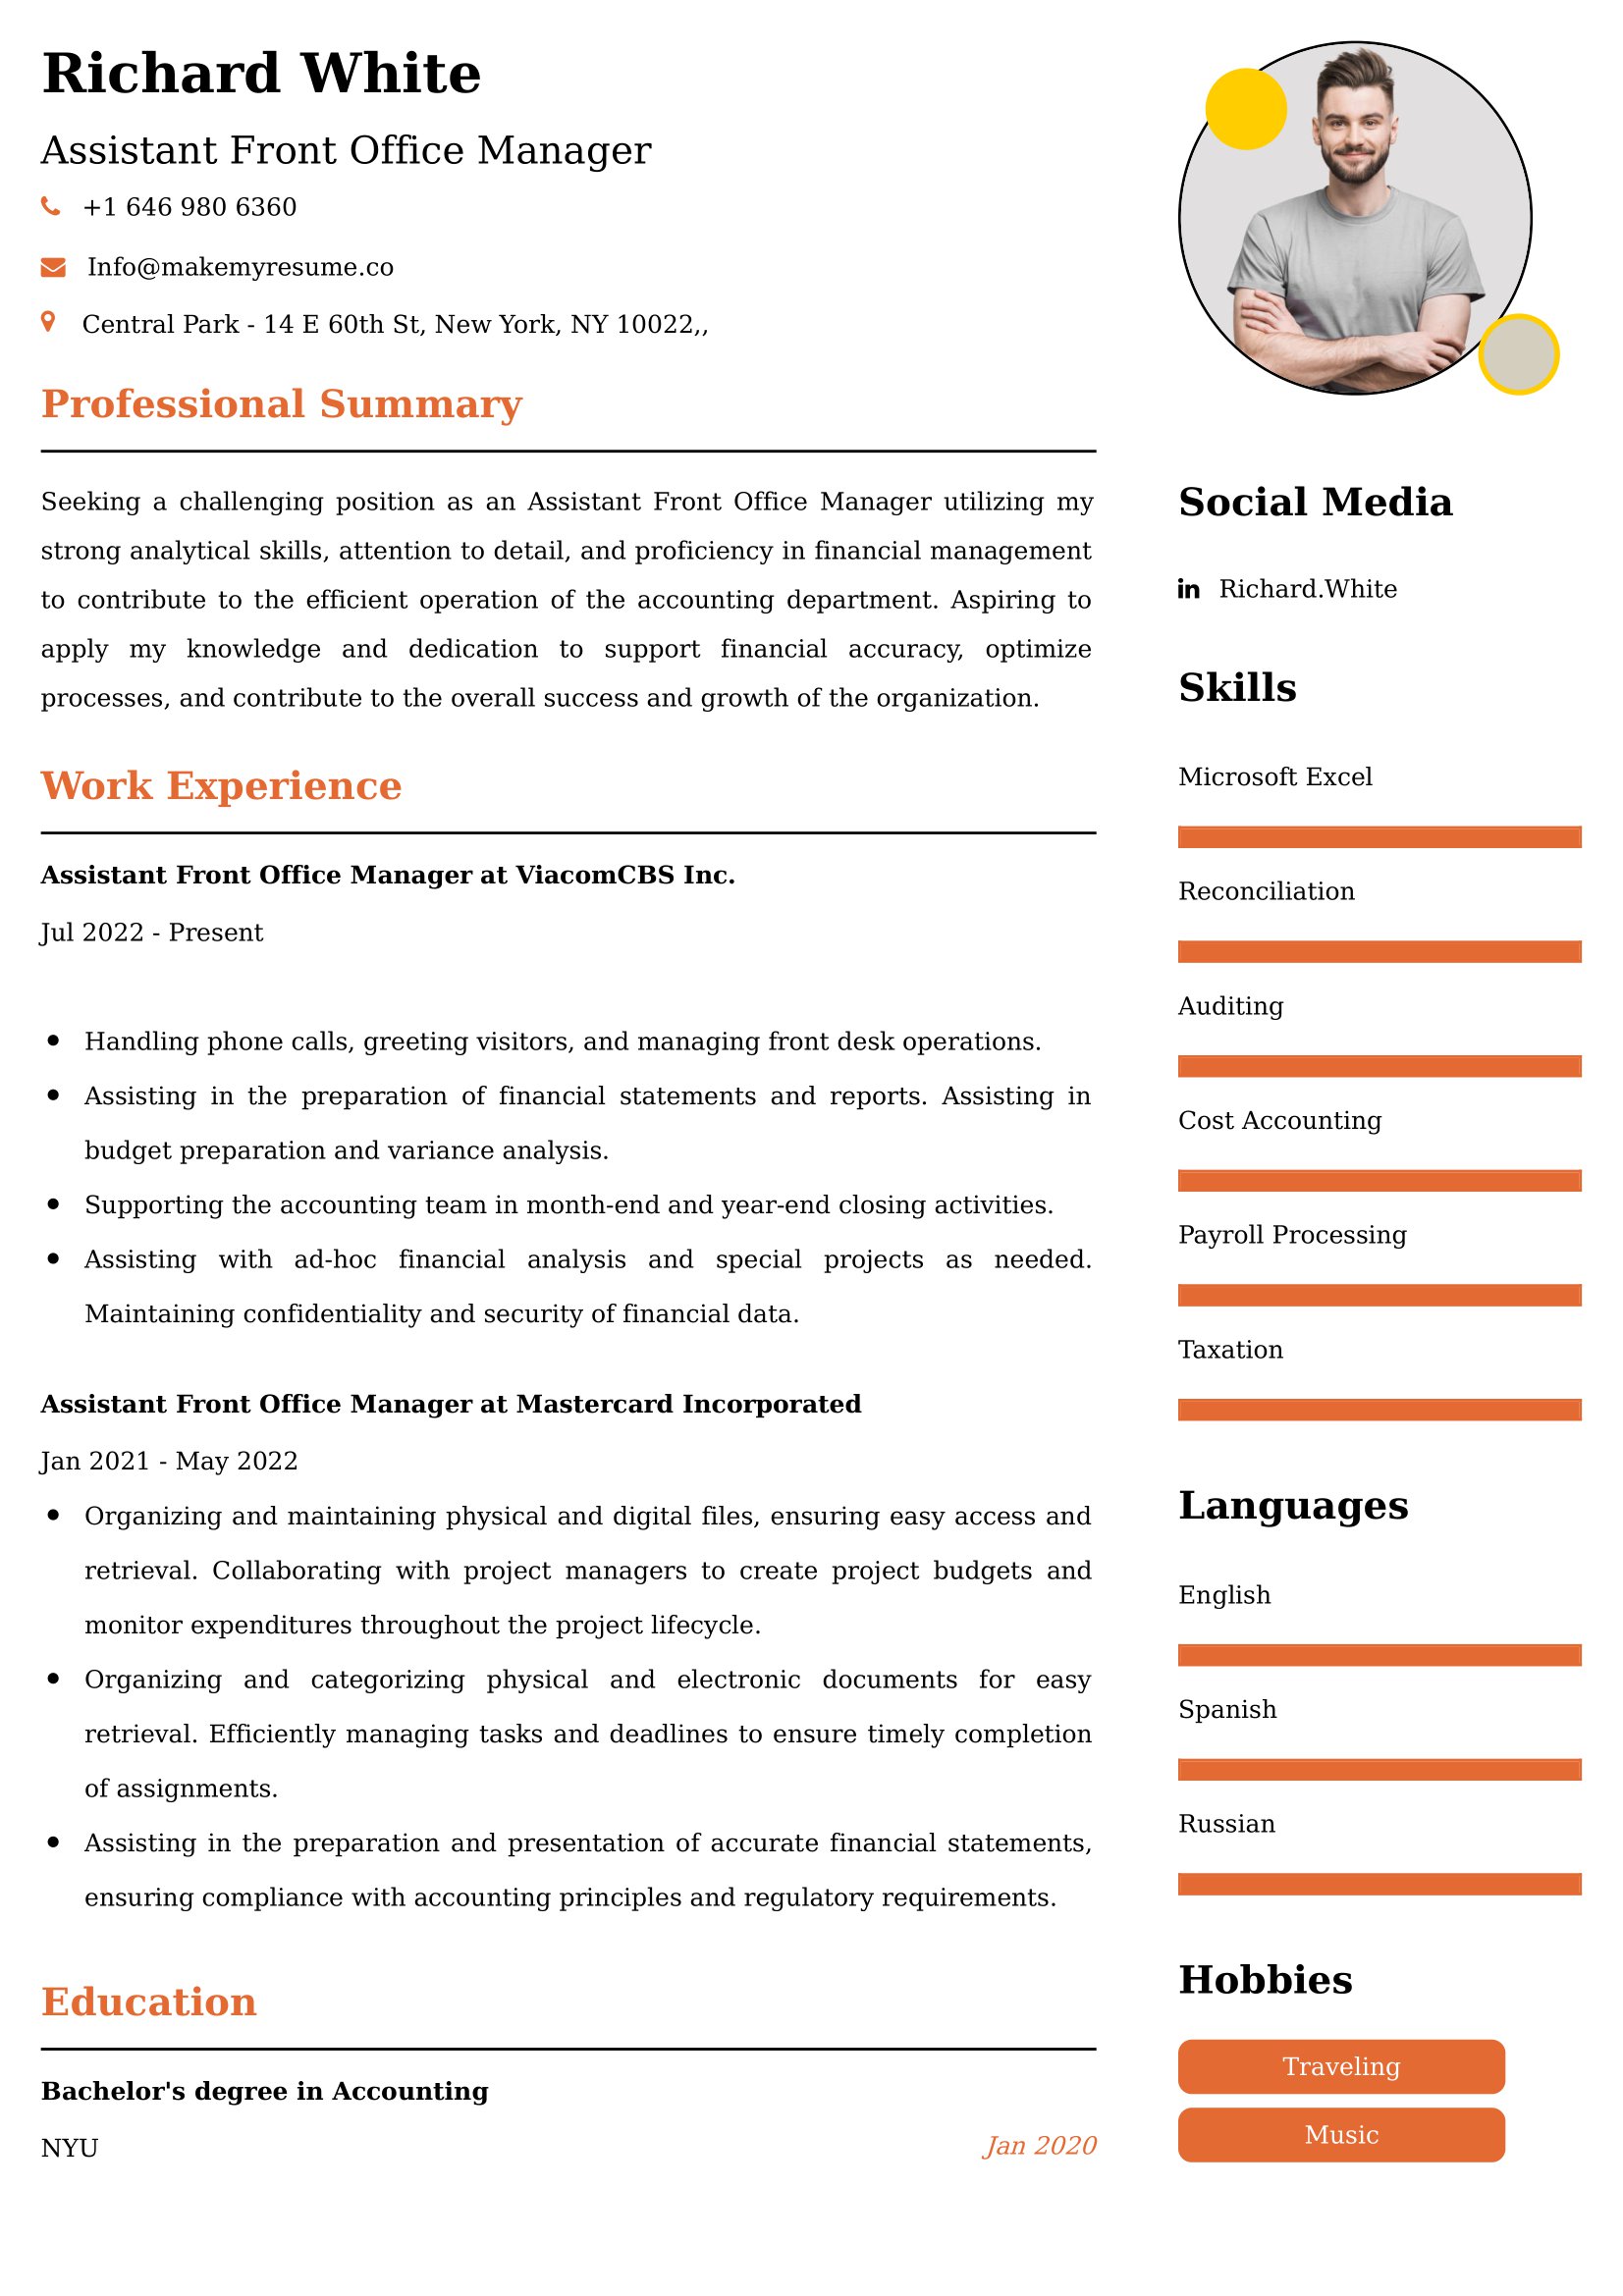 Assistant Front Office Manager Resume Examples India